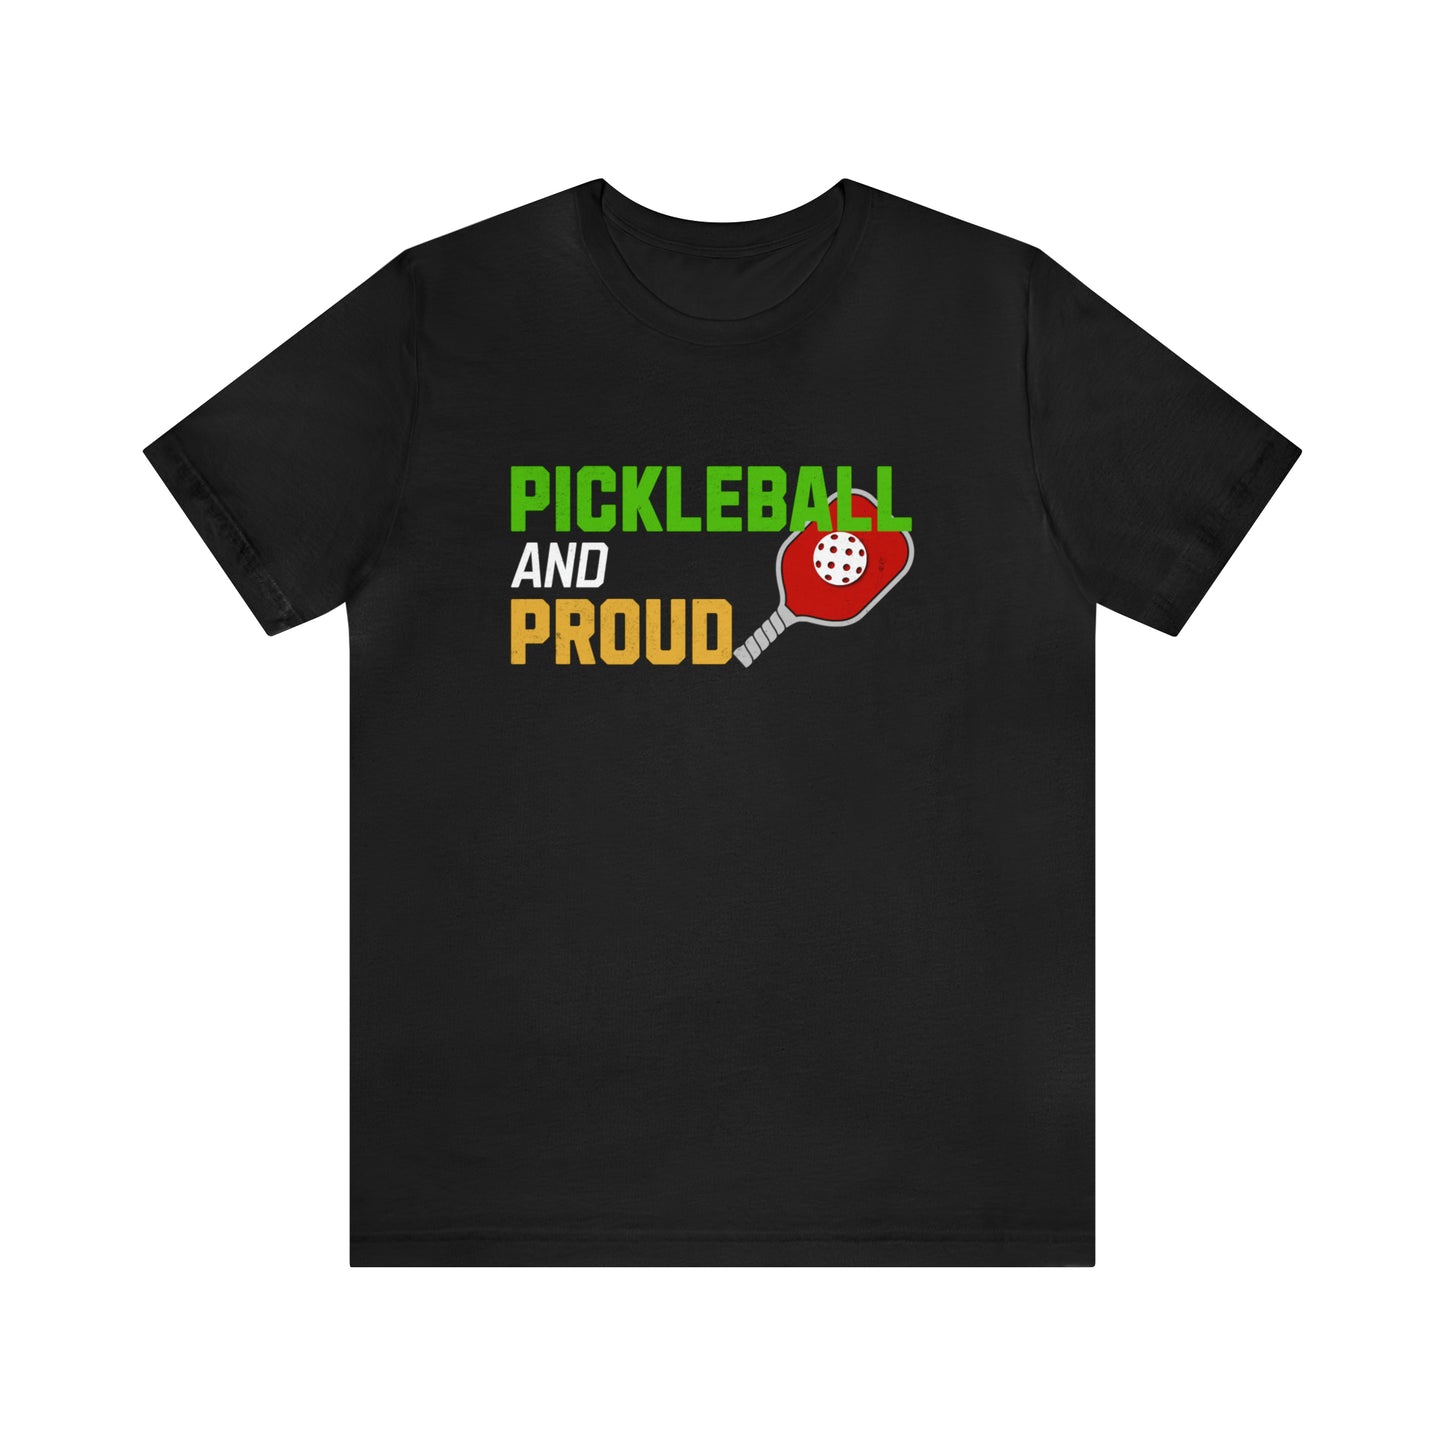 Pickleball and Proud: Cotton Shirt for Passionate Players